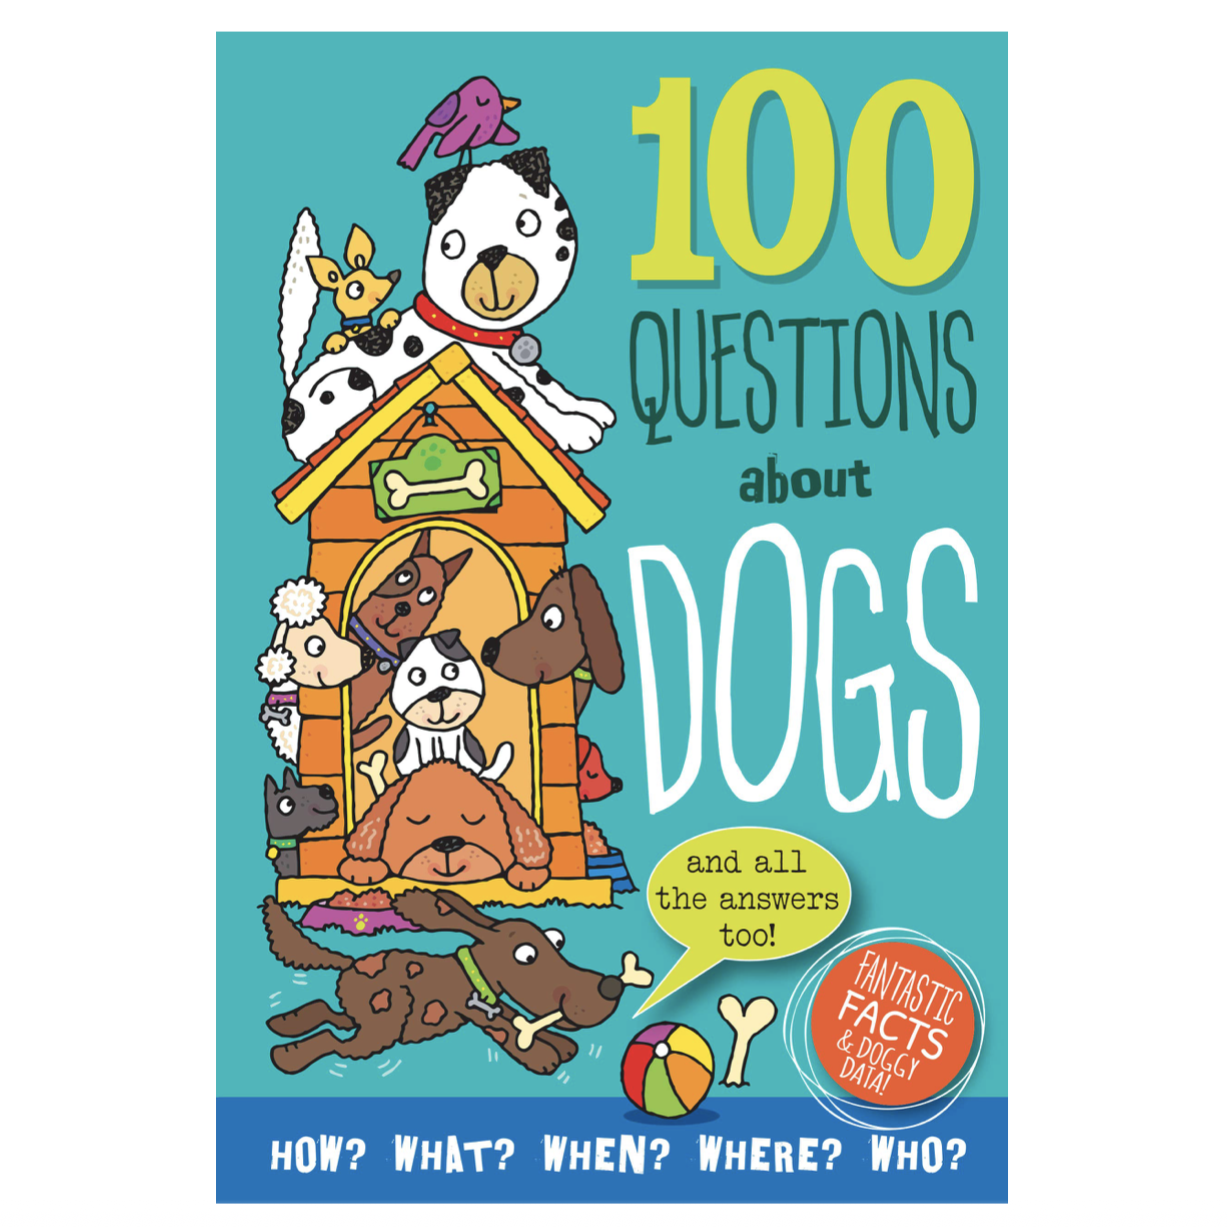 100 Questions about Dogs